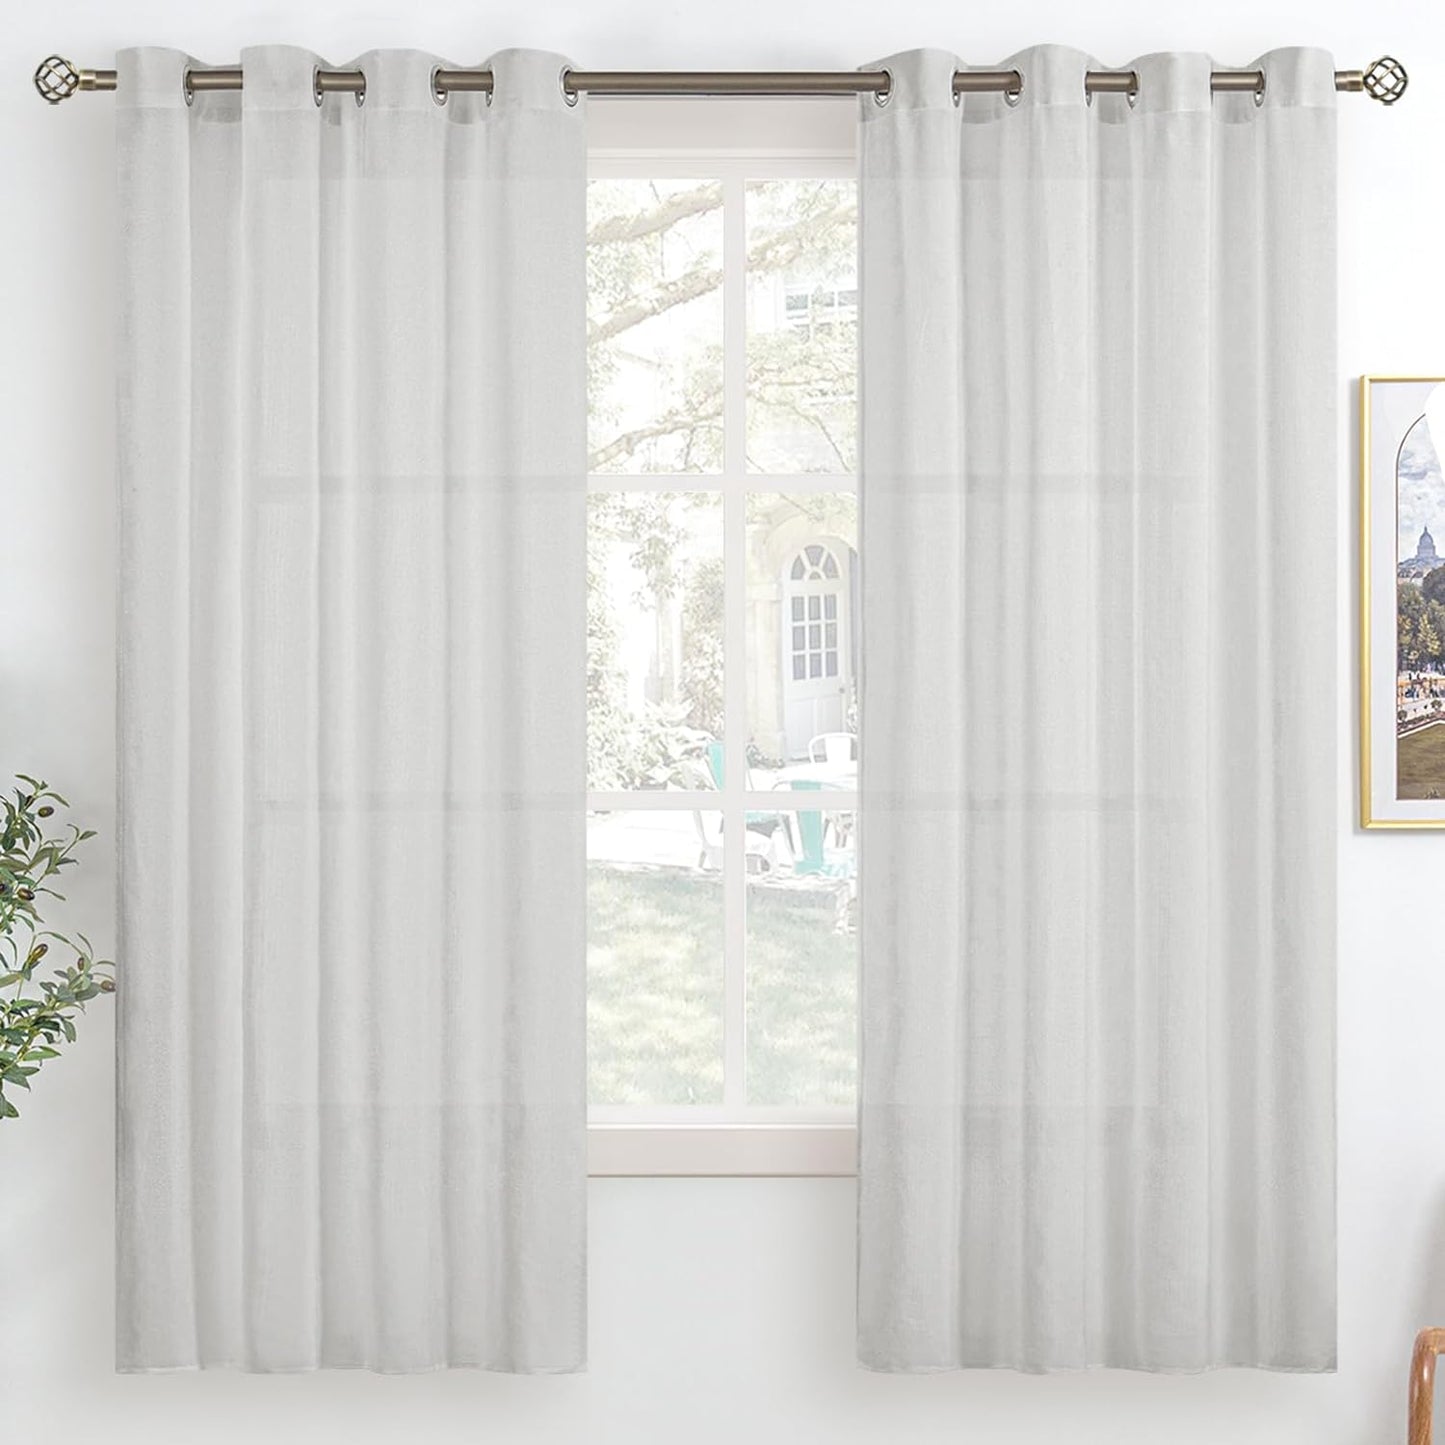 Bgment Natural Linen Look Semi Sheer Curtains for Bedroom, 52 X 54 Inch White Grommet Light Filtering Casual Textured Privacy Curtains for Bay Window, 2 Panels  BGment Light Grey 52W X 63L 